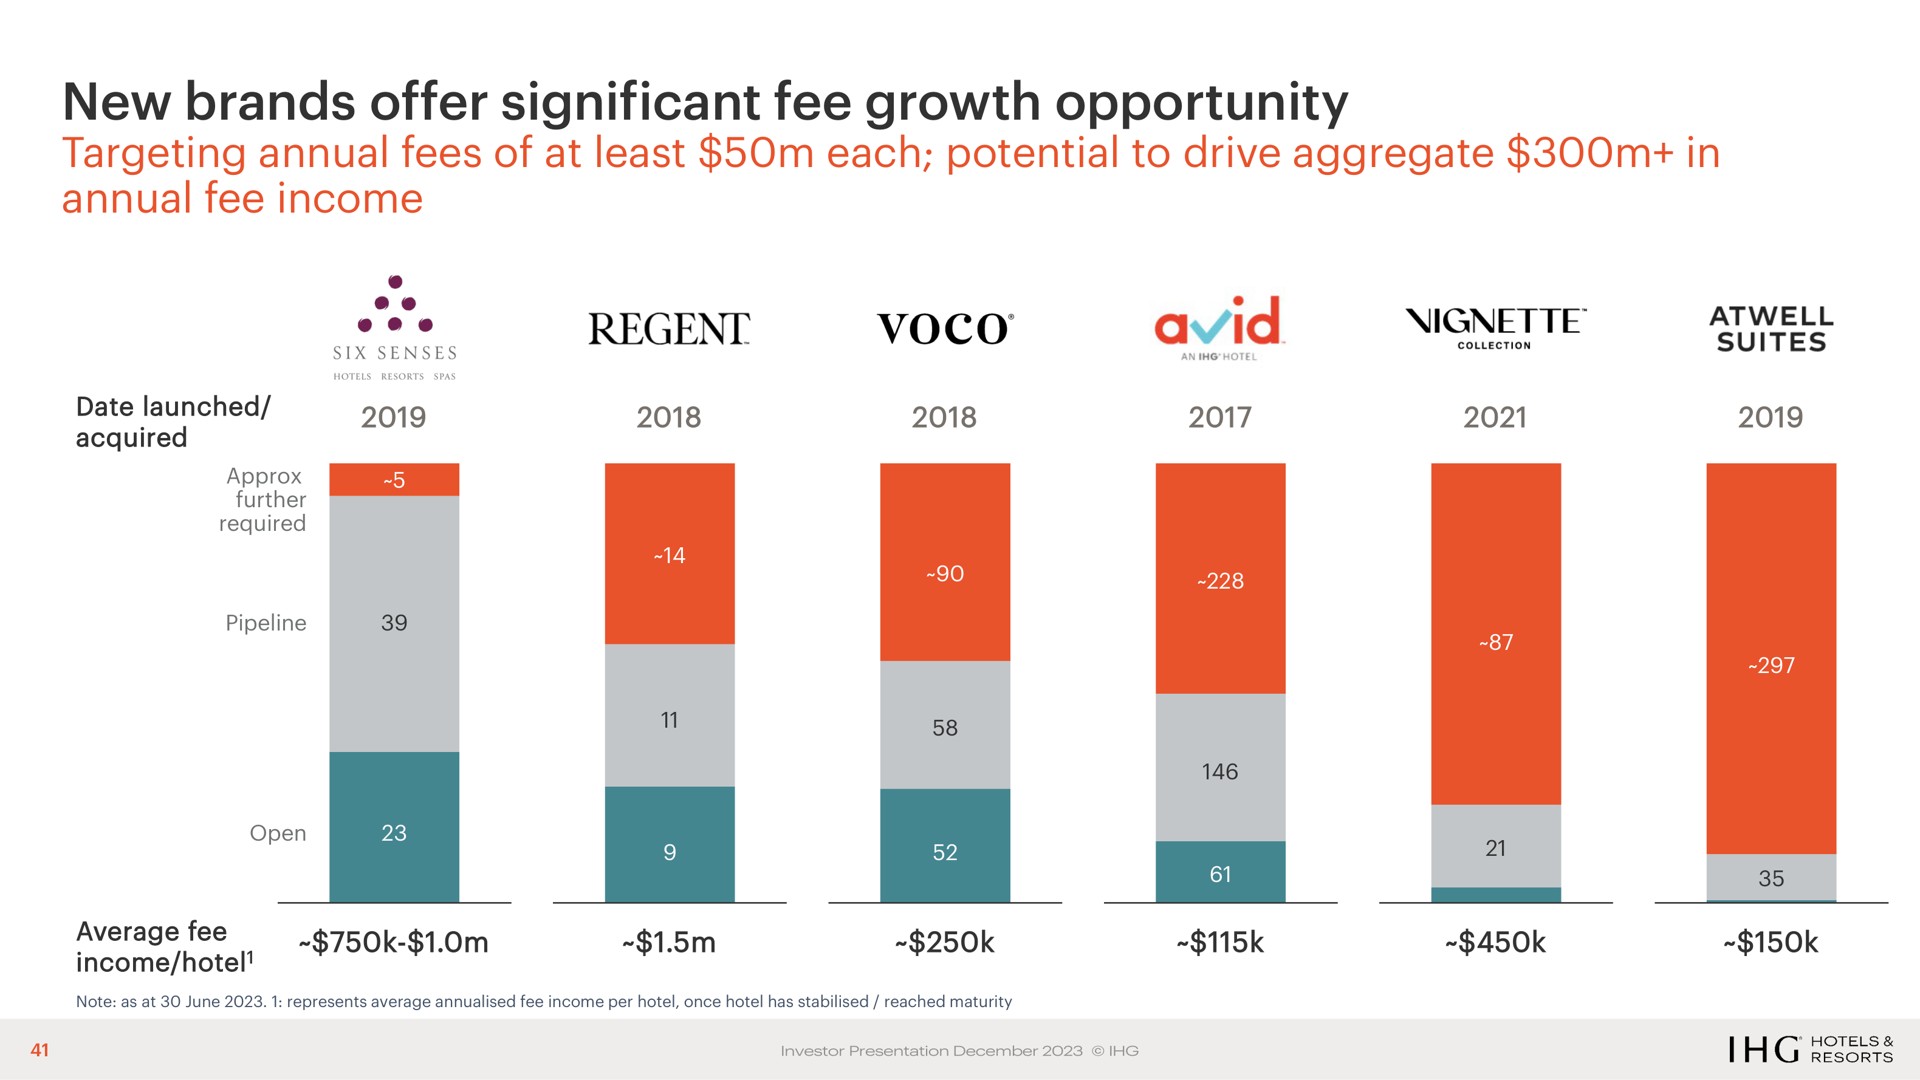 new brands offer significant fee growth opportunity noa regent avid open has | IHG Hotels